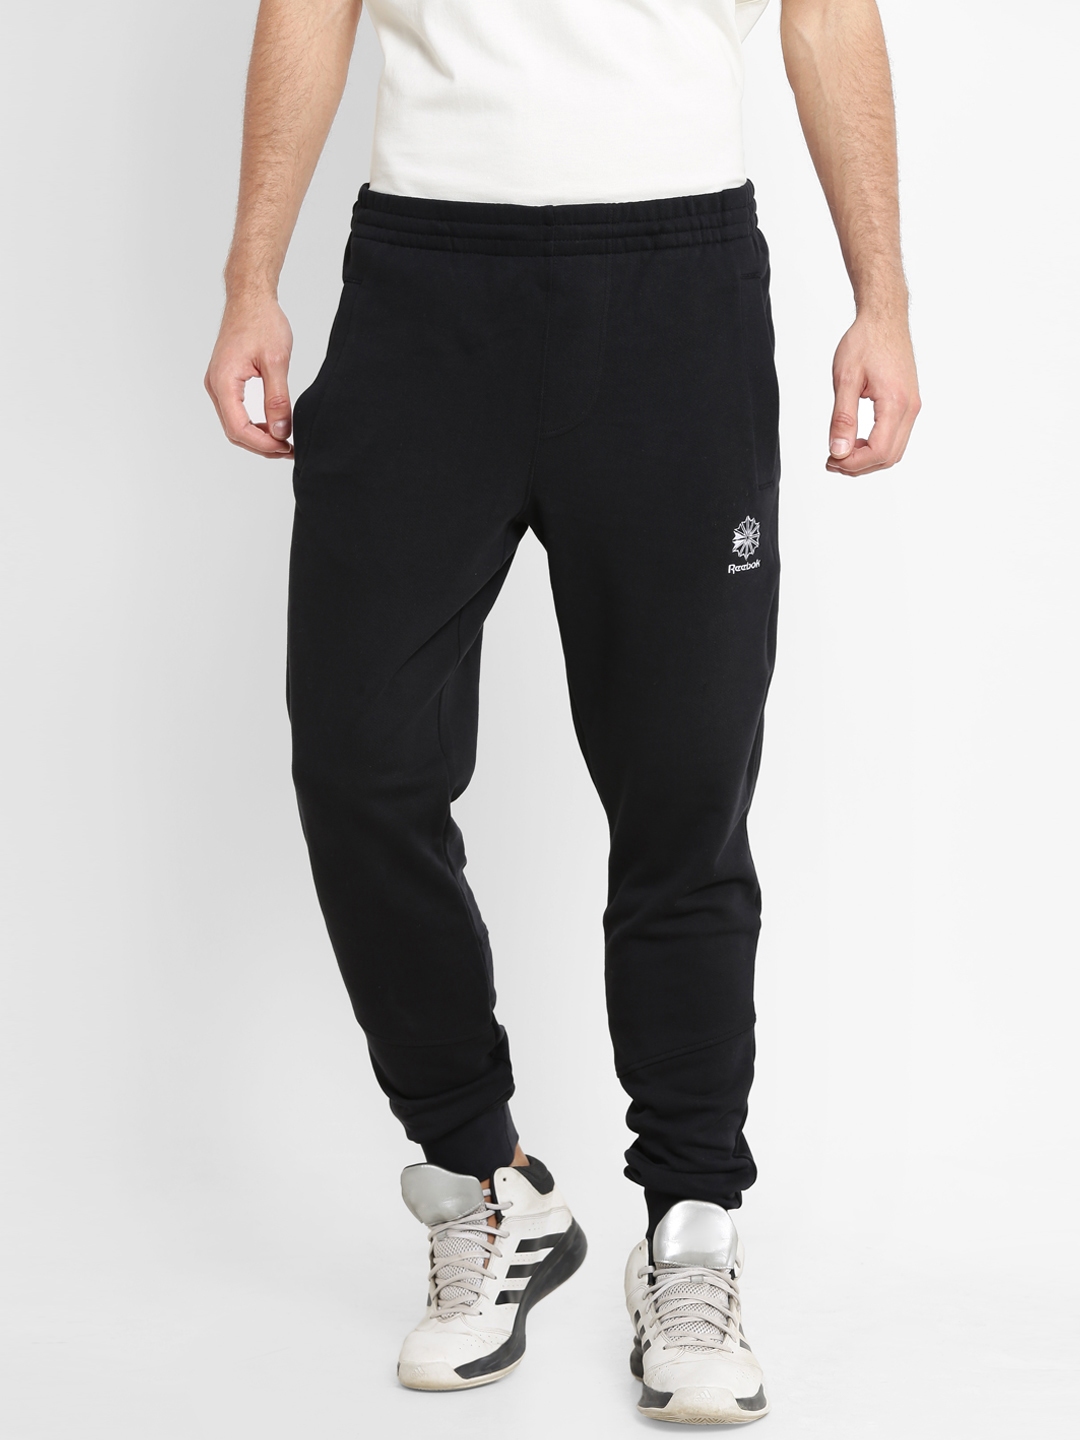 Reebok Classics French Terry Pants in BLACK